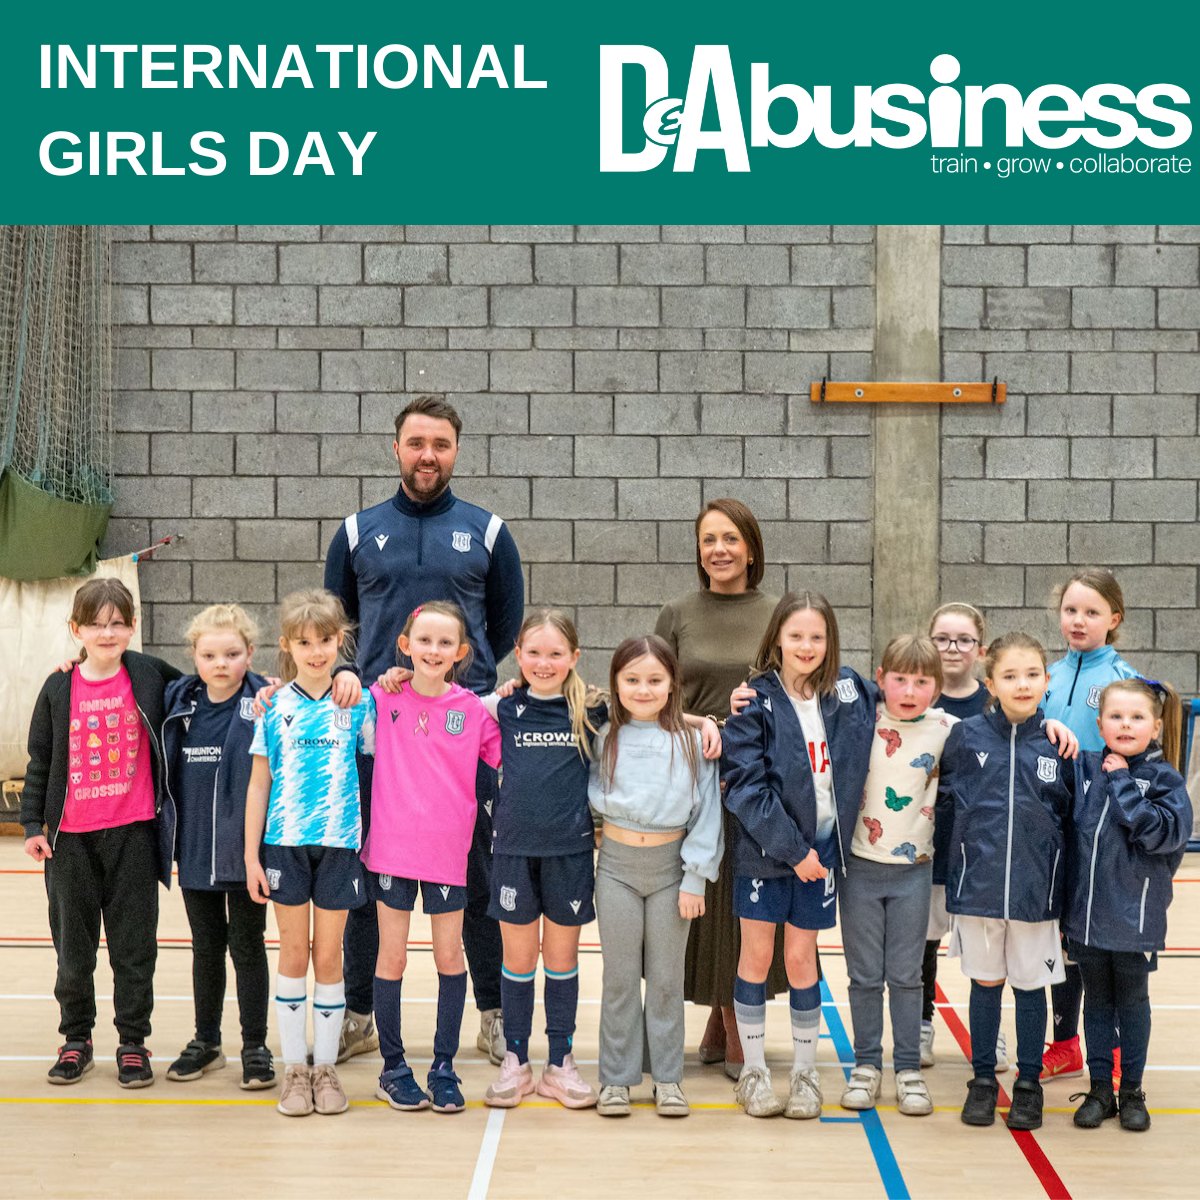 Today on International Girls' Day, we would like to celebrate Dundee FC’s first ever girls team! 👧⚽ Read more here👇 pulse.ly/lbn06r2gef #DayoftheGirl #InternationalGirlsDay #GirlPower #DundeeFCCT